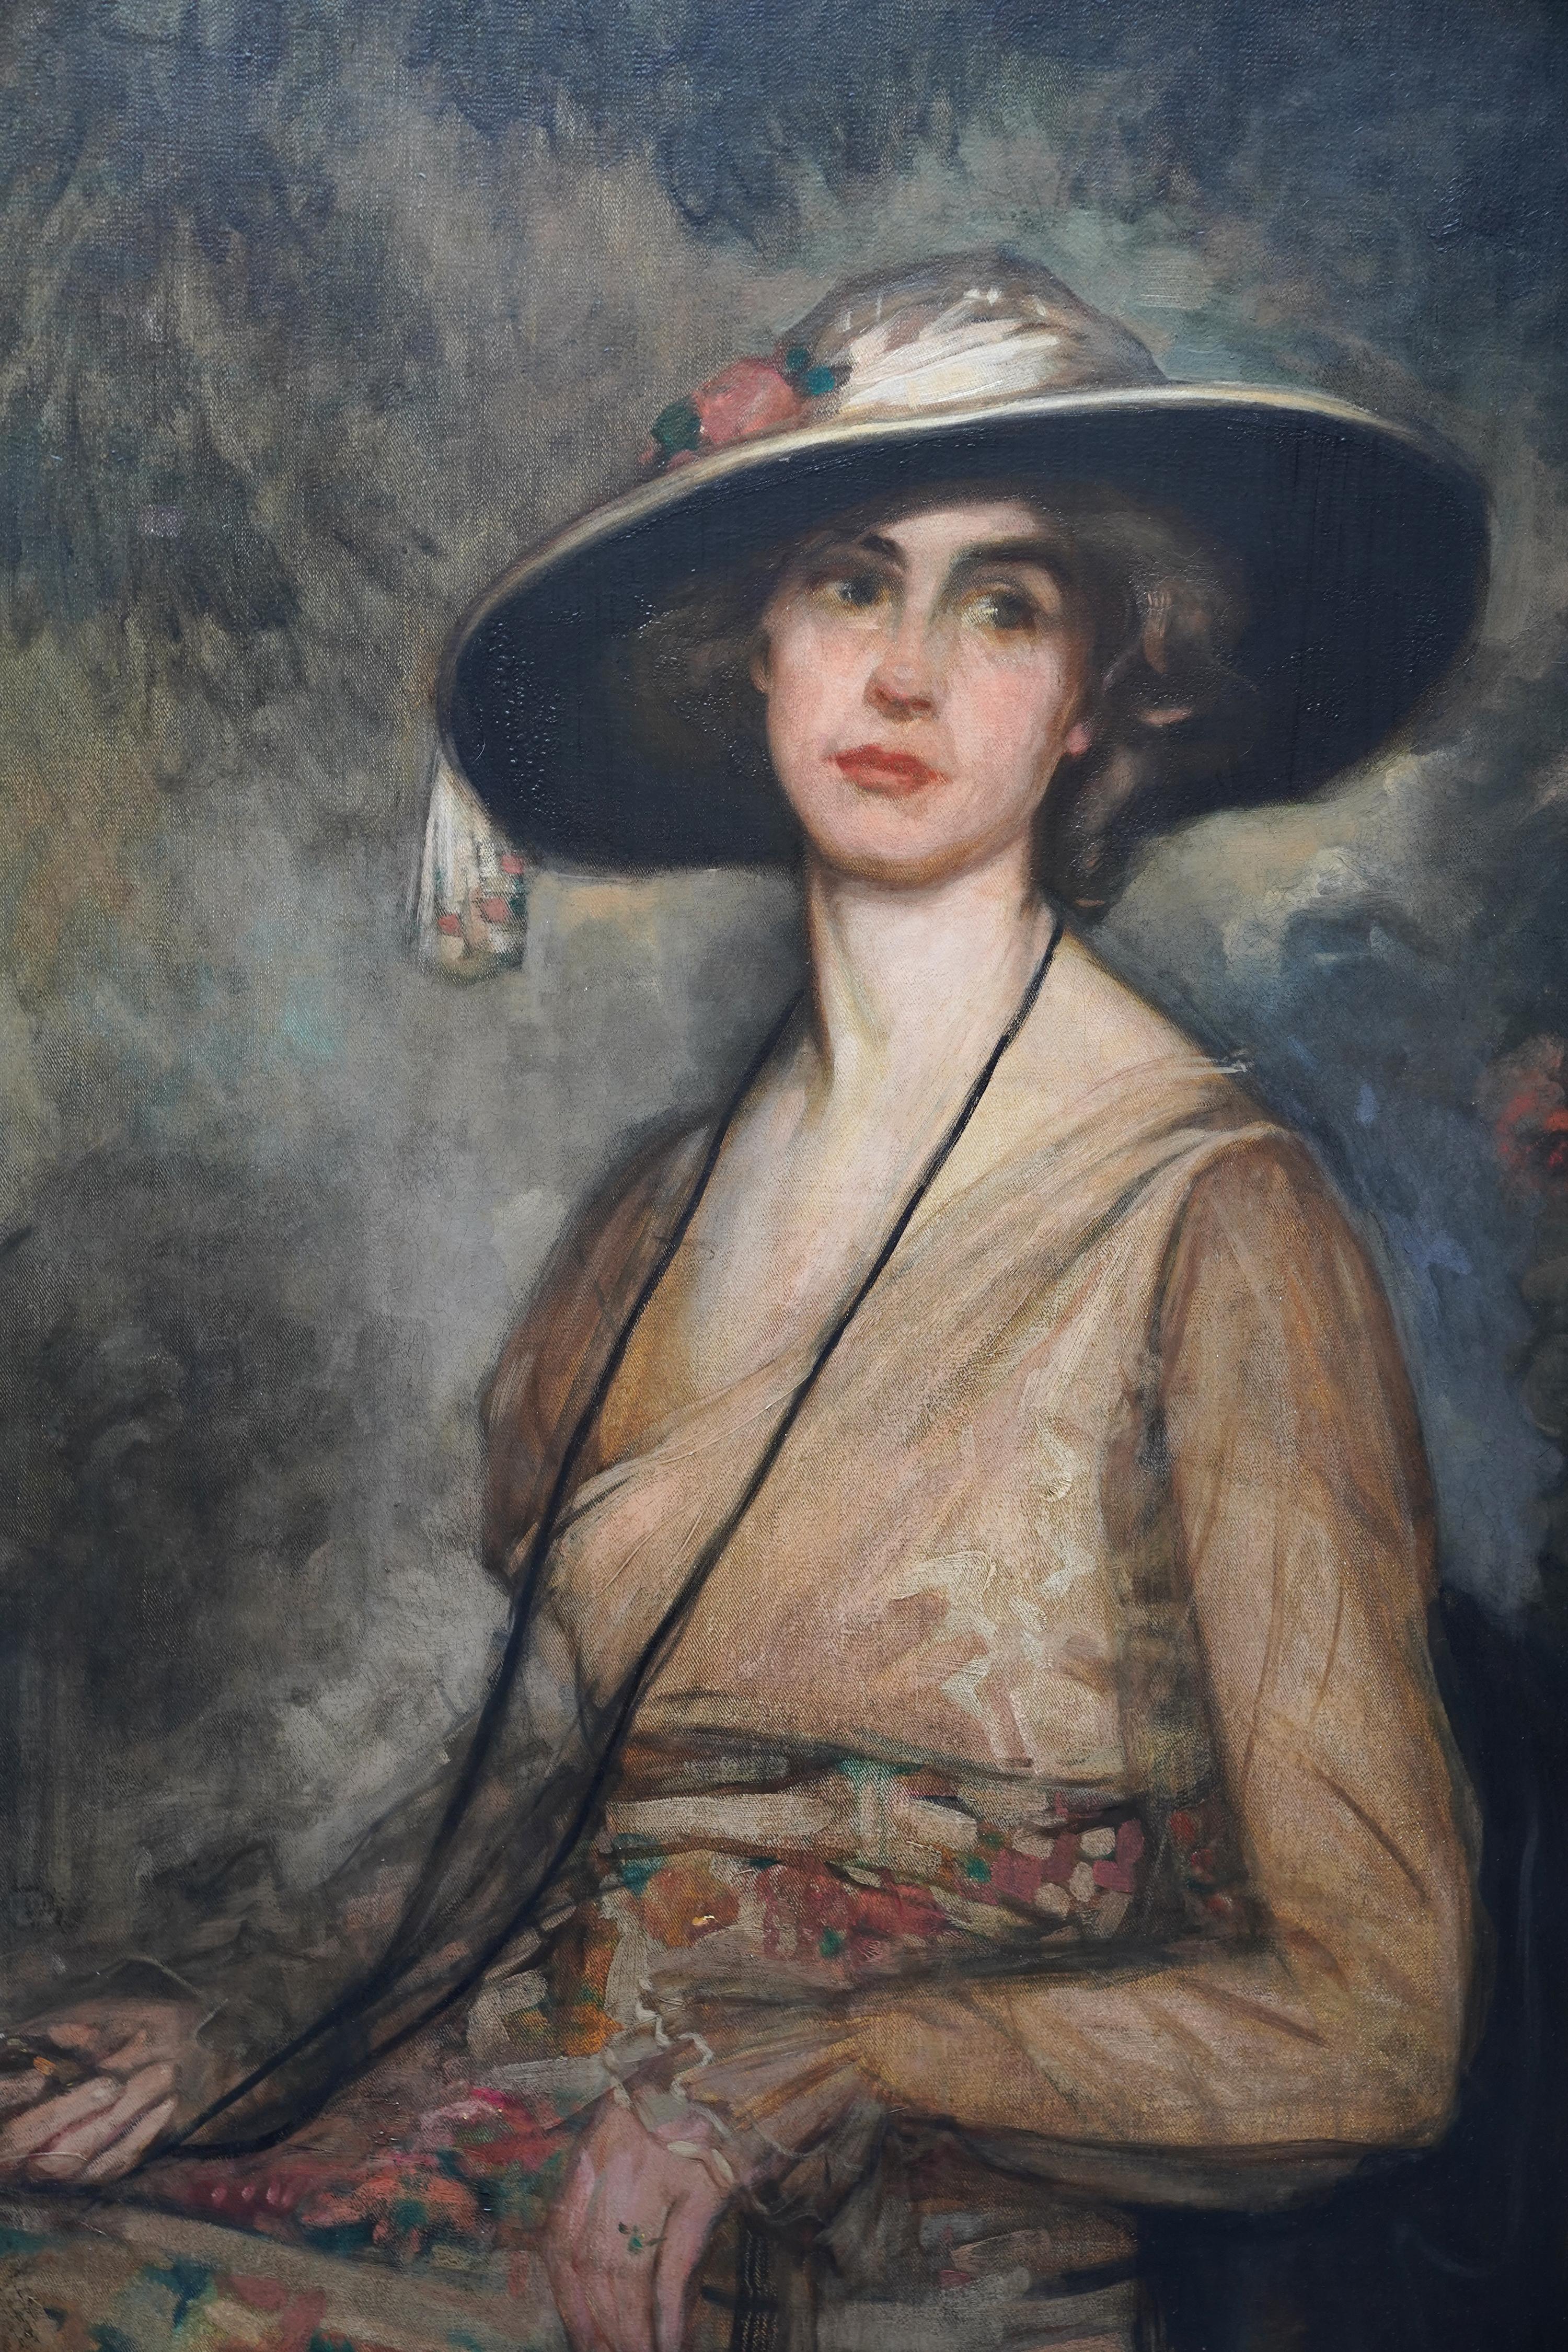 This lovely British Edwardian Impressionist portrait oil painting is by noted artist William George Robb. Painted circa 1901 the sitter is Louisa Ann Inglis, wife of Sir Charles Inglis (1851-1911), General Manager and Consulting Engineer of the